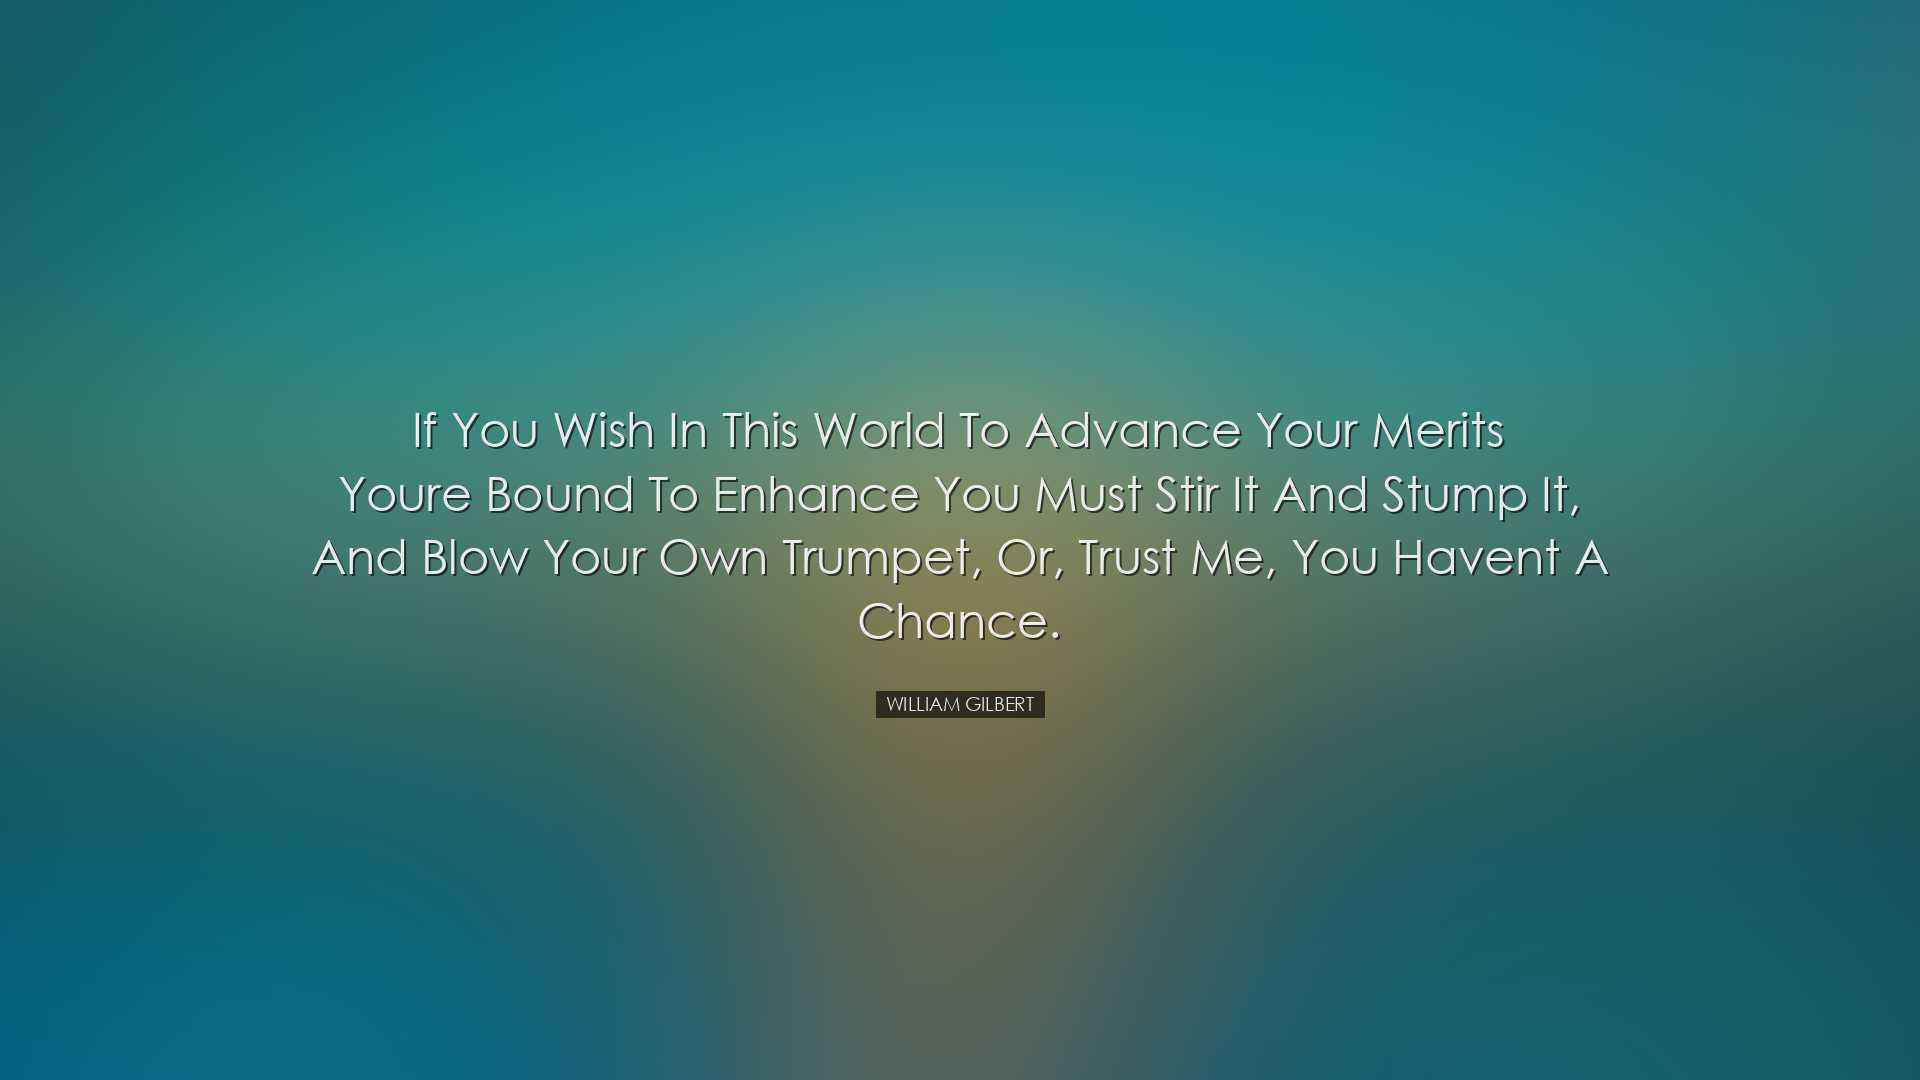 If you wish in this world to advance your merits youre bound to en